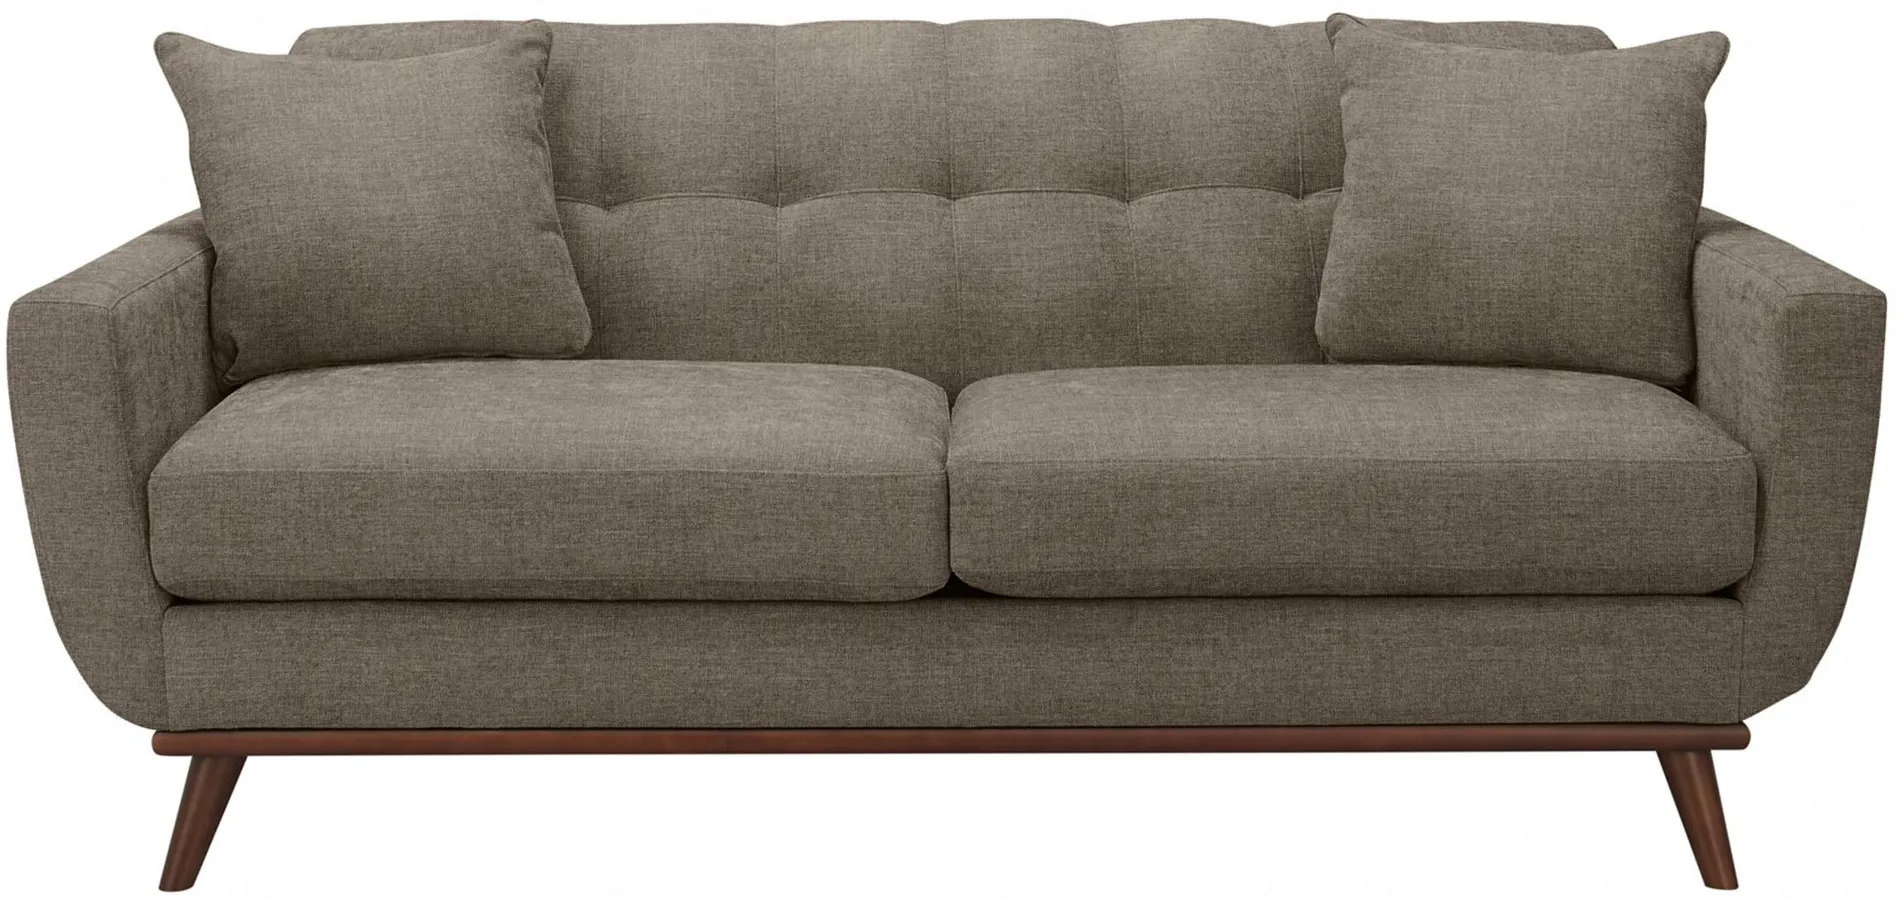 Milo Apartment Sofa in Santa Rosa Taupe by H.M. Richards